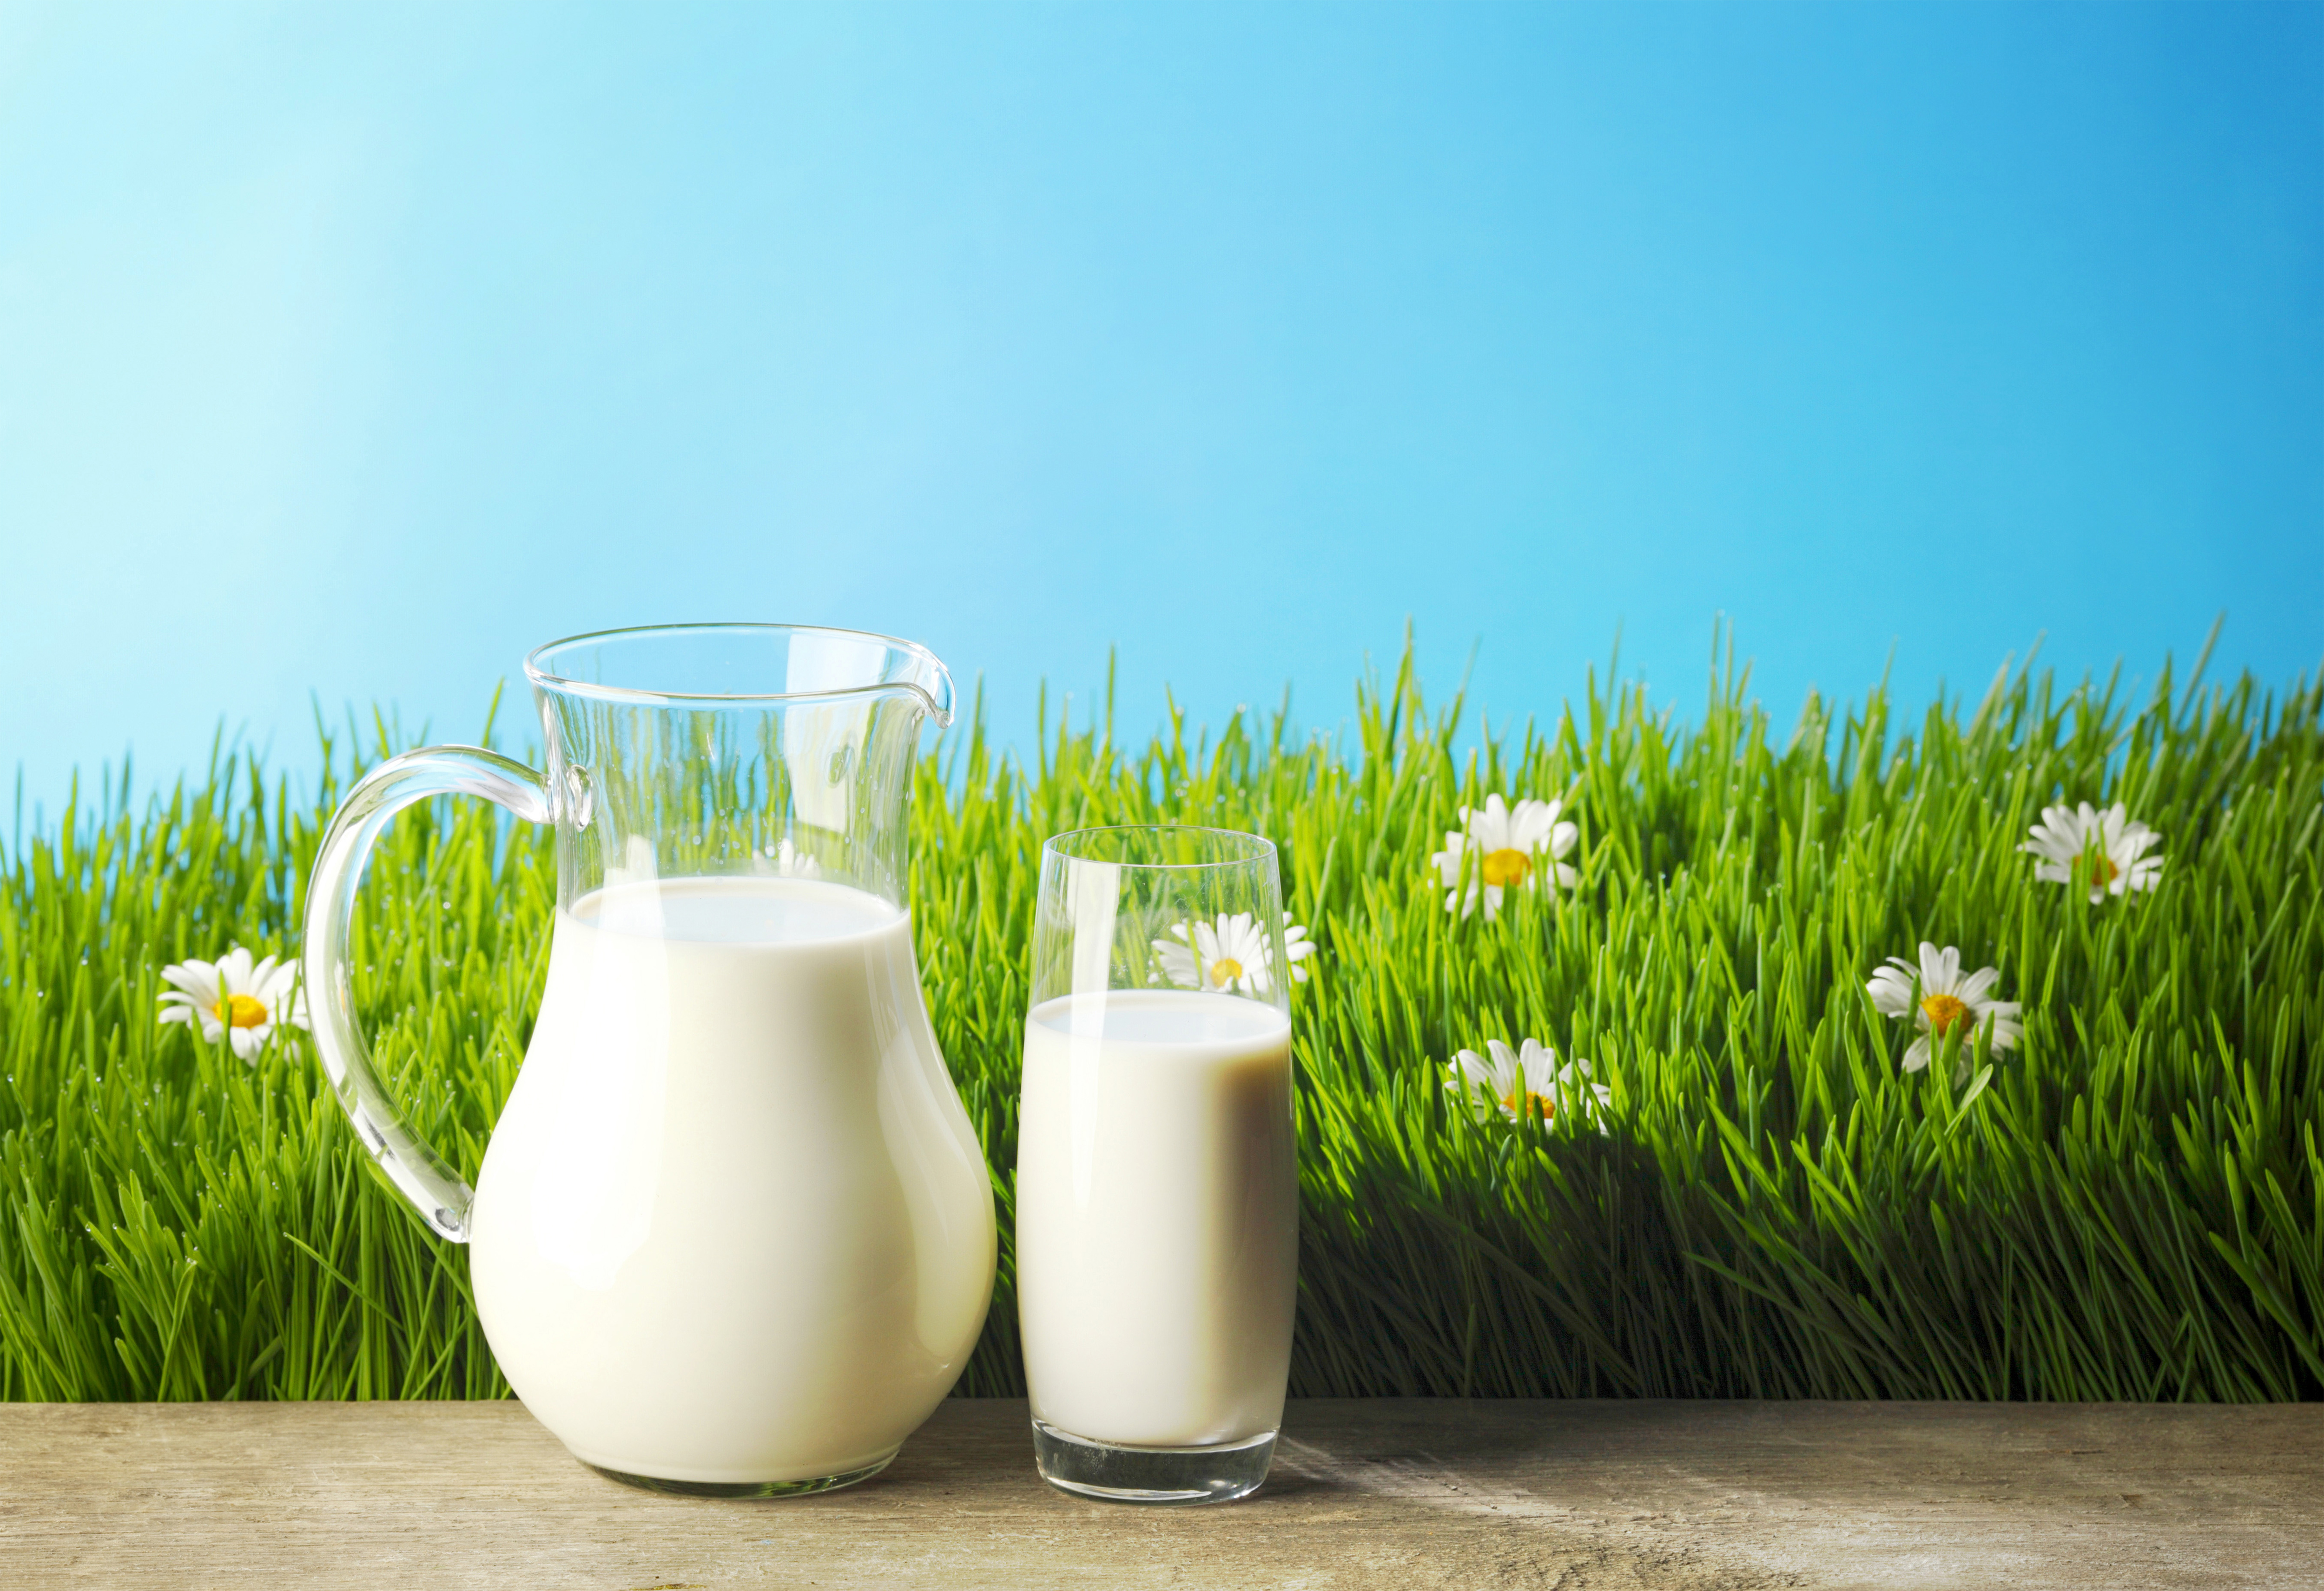 Grass And Milk Background Gallery Yopriceville High Quality